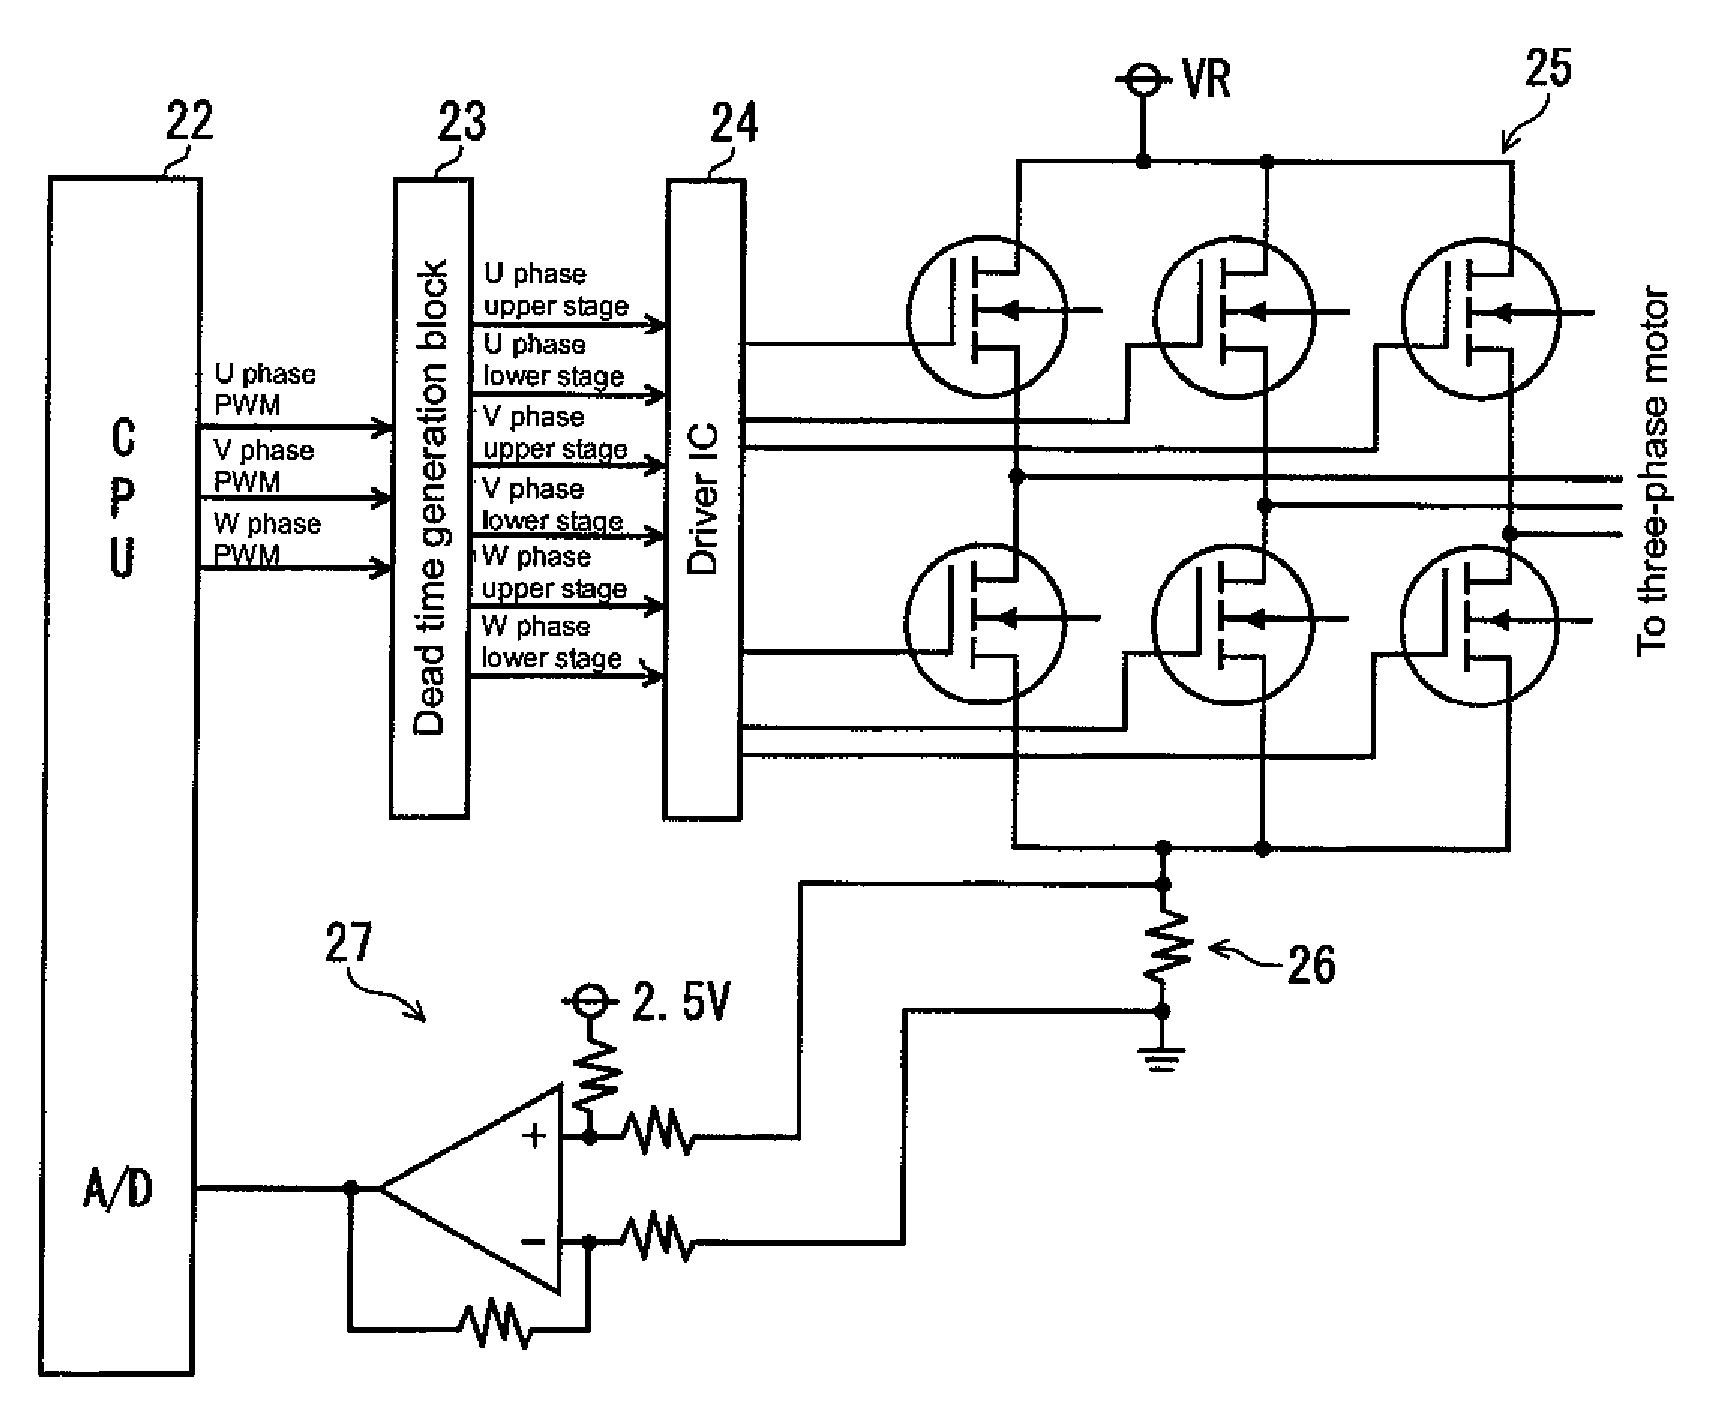 Controller of multi-phase electric motor